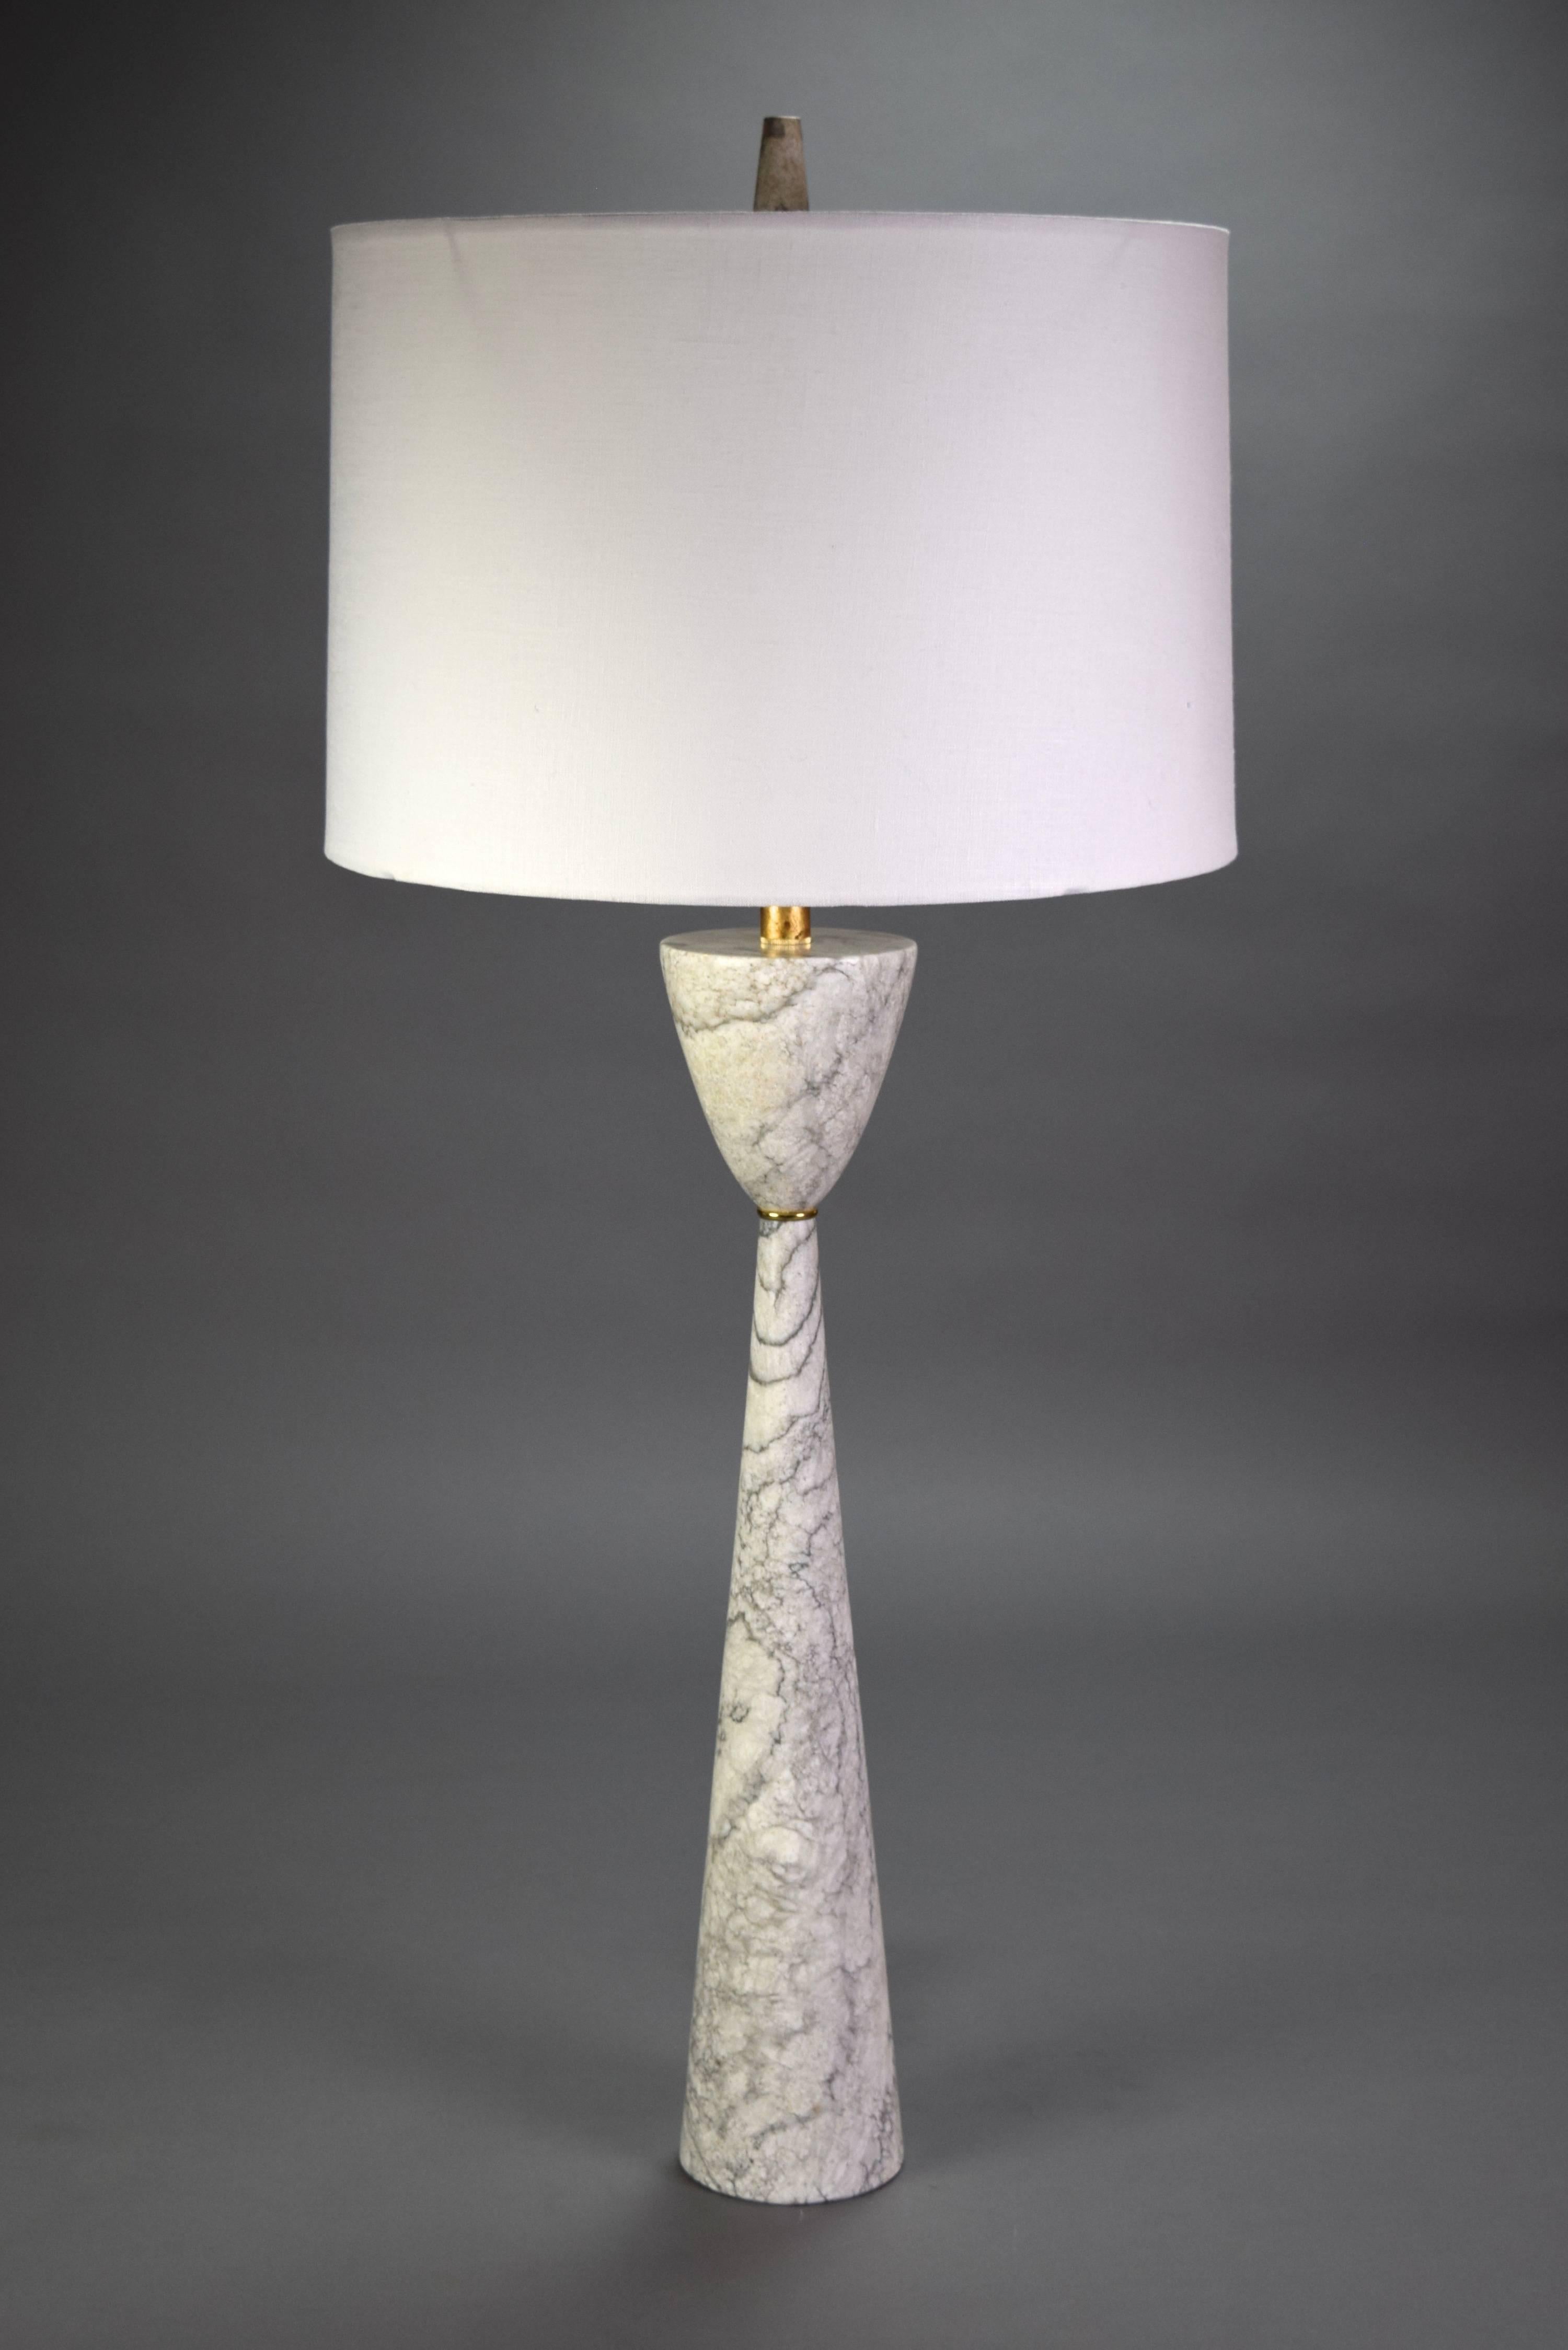 This Postmodern style lamp of white and gray variegated marble in the shape of a tall slender waisted cone.

Height to light fitting: 29